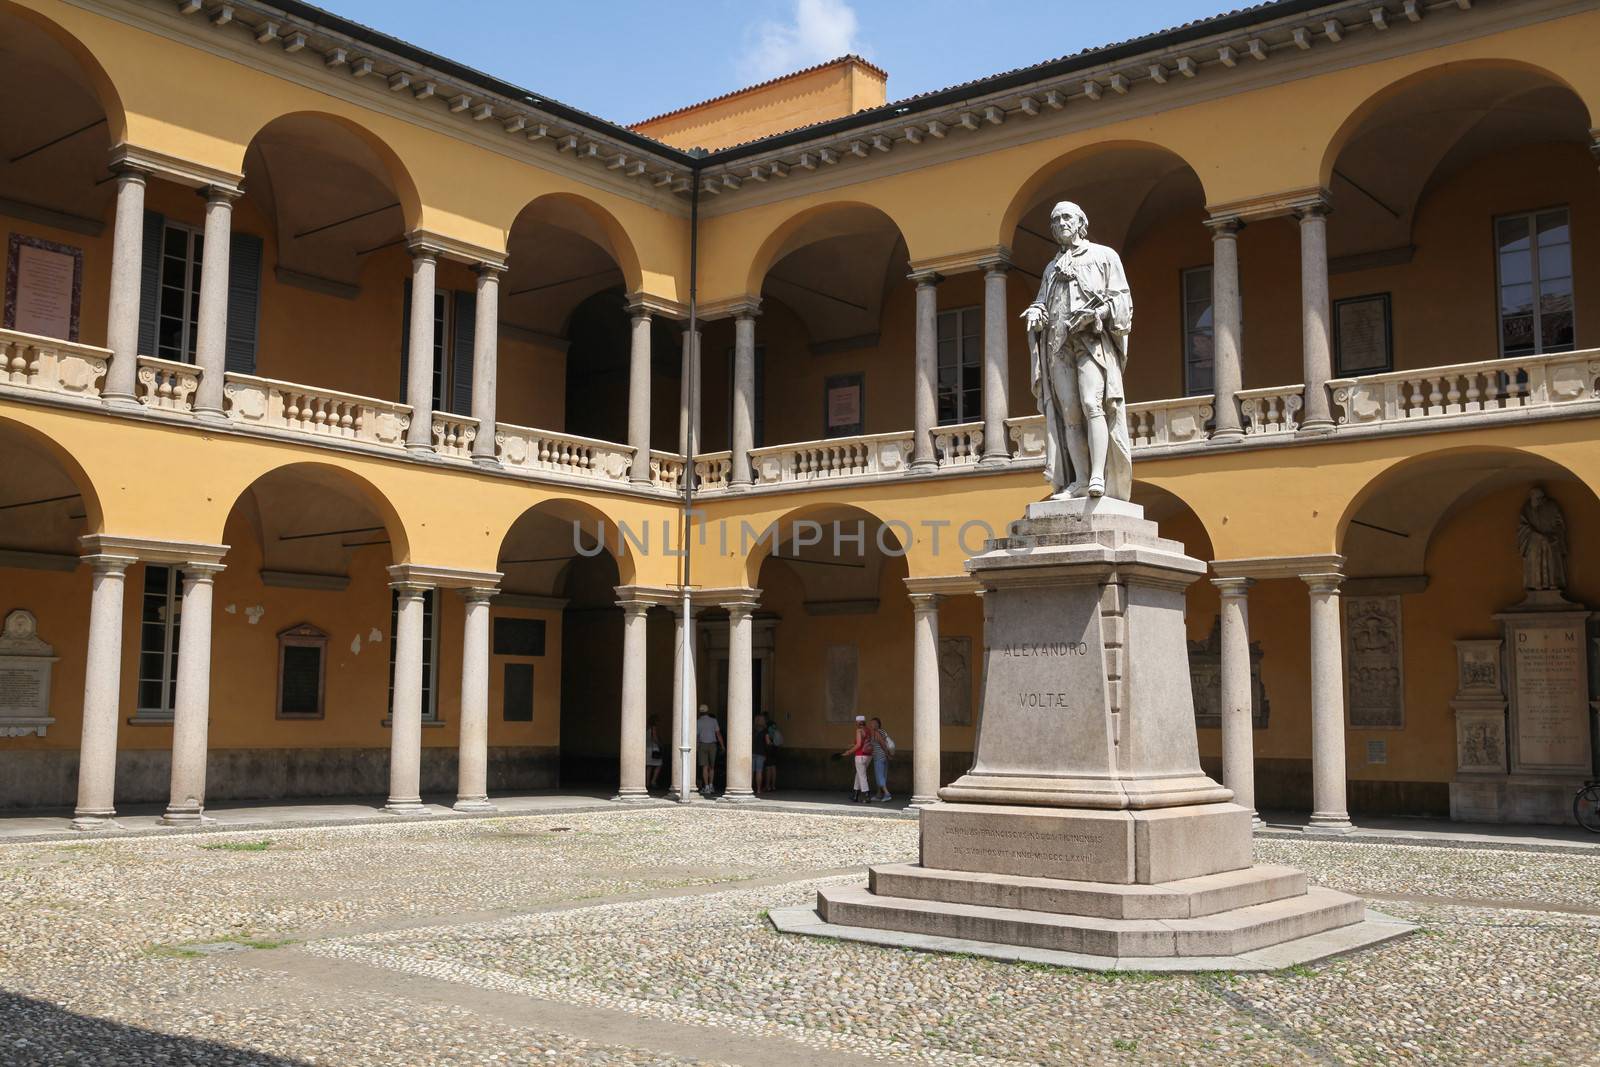 University of Pavia, Italy by bayberry